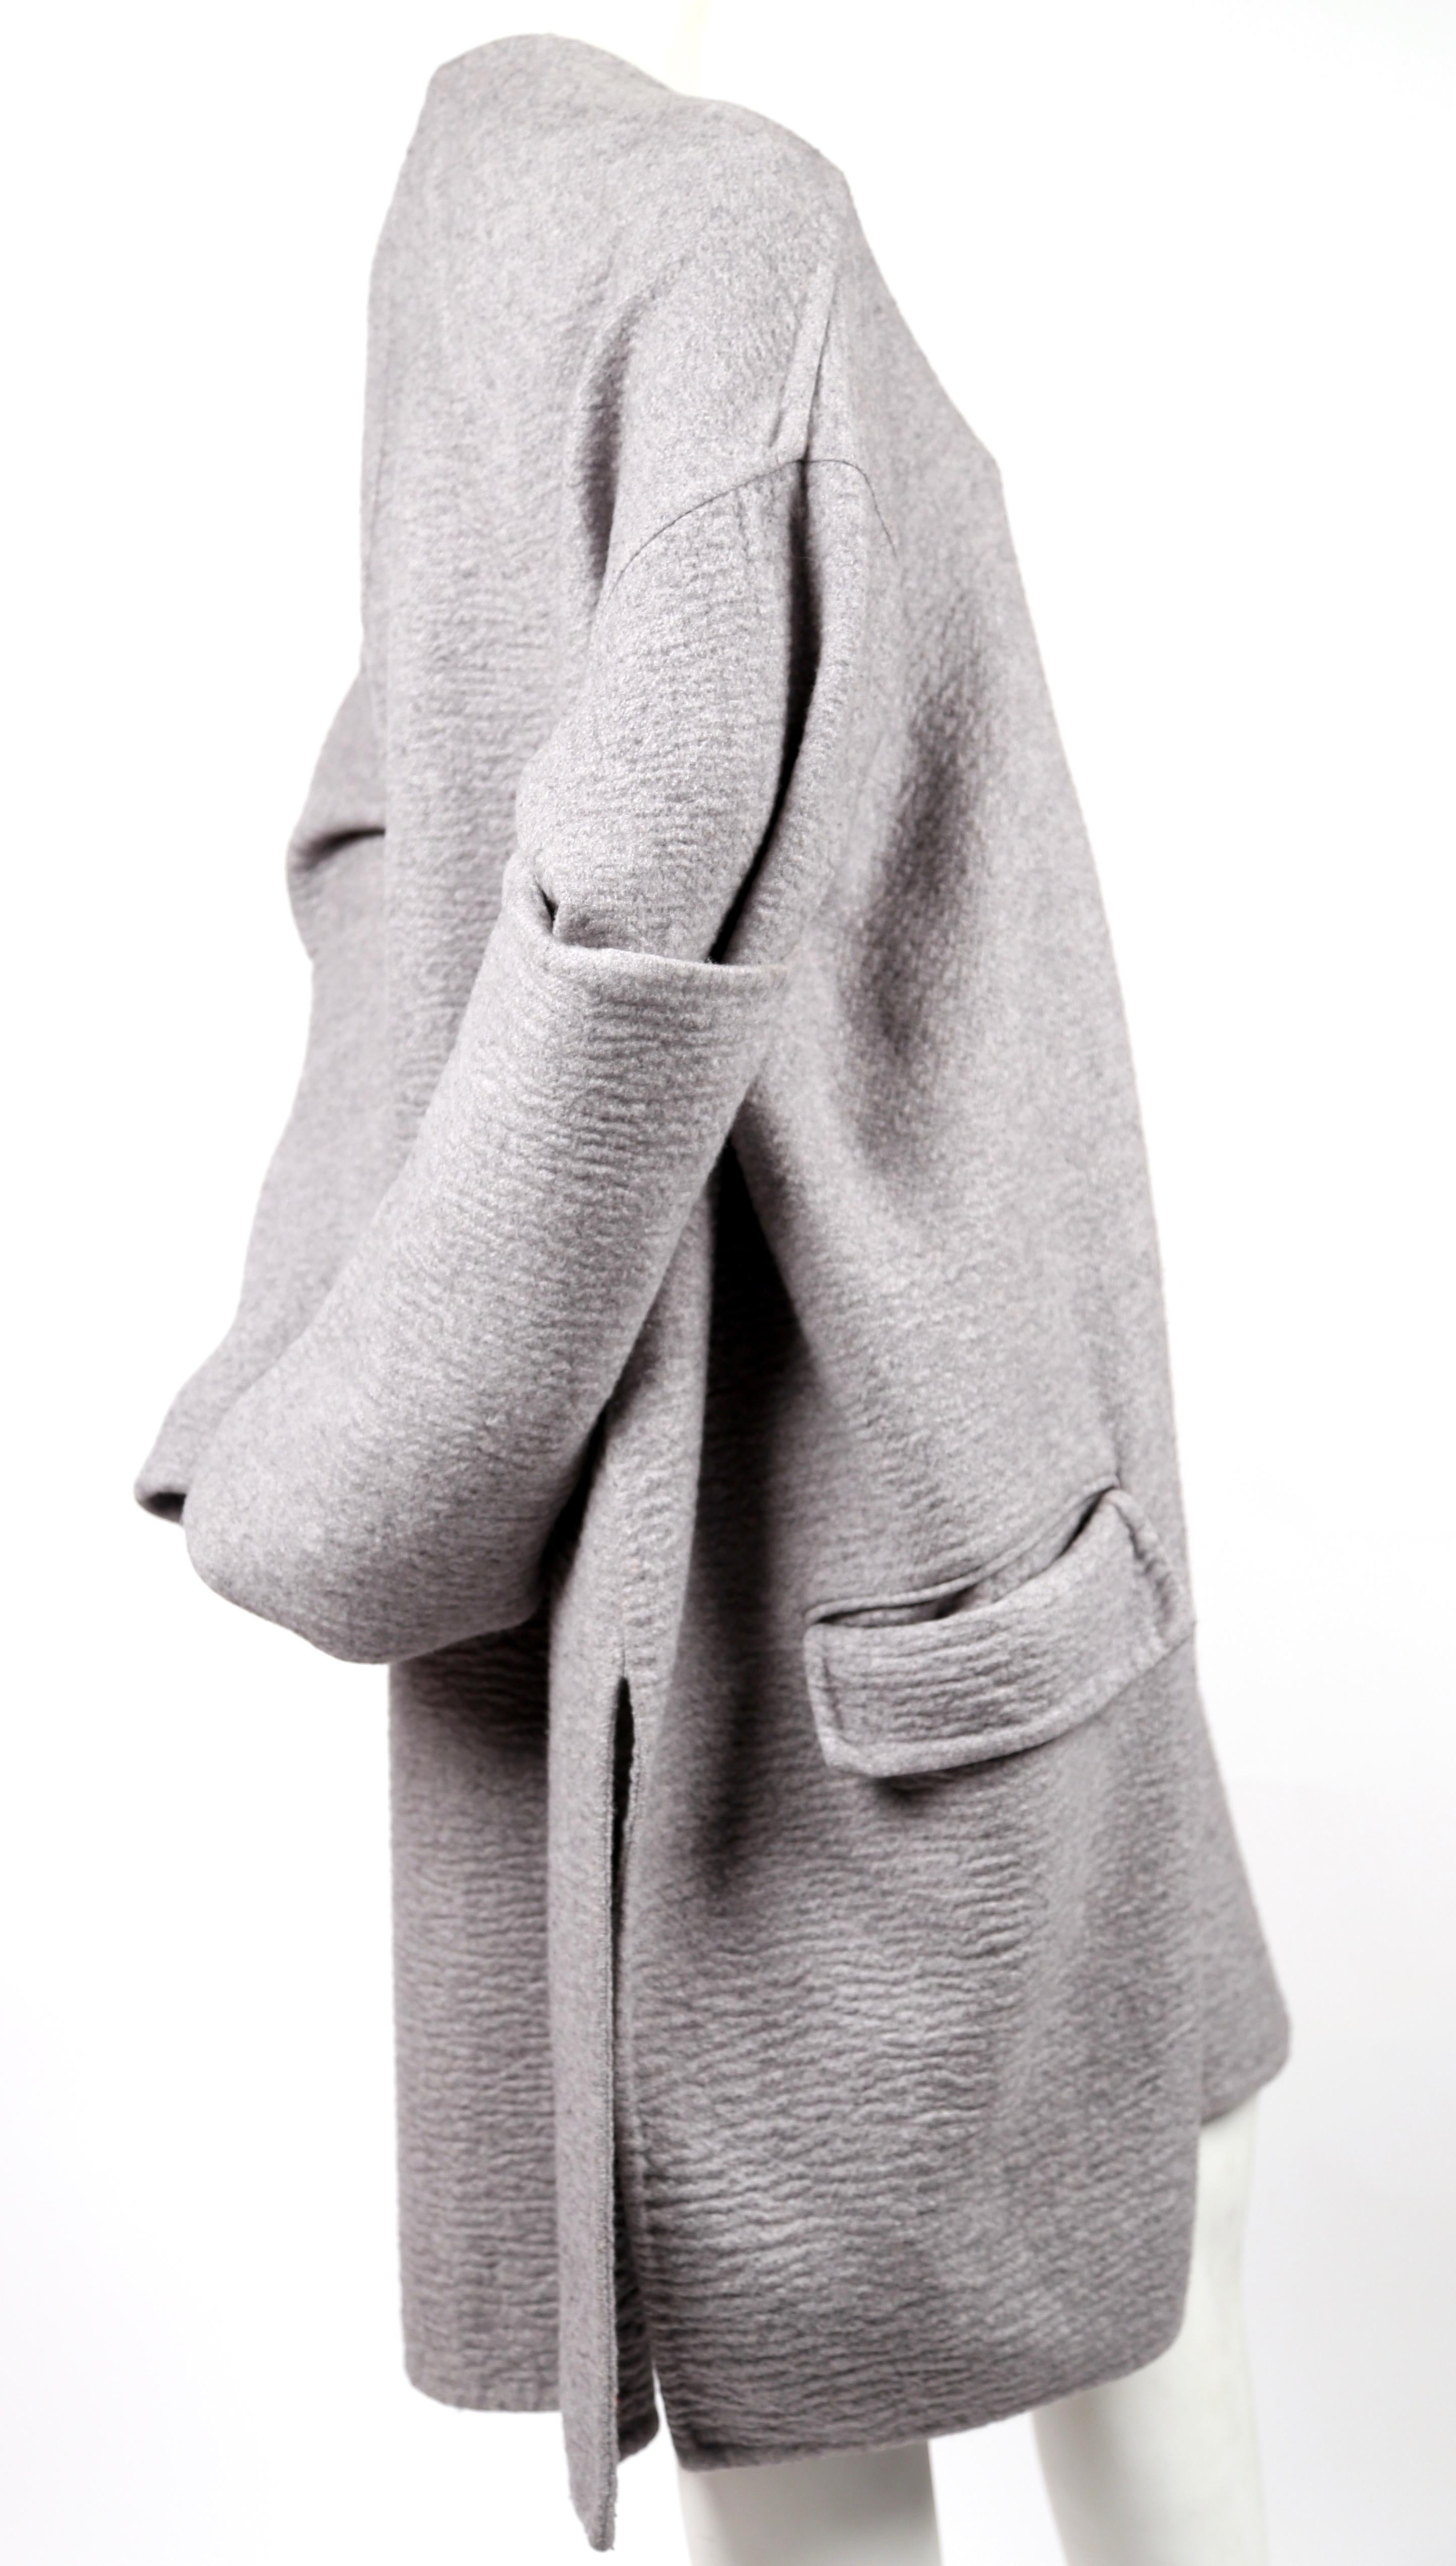 Gray 2013 CELINE by PHOEBE PHILO grey cashmere runway coat with exaggerated sleeves